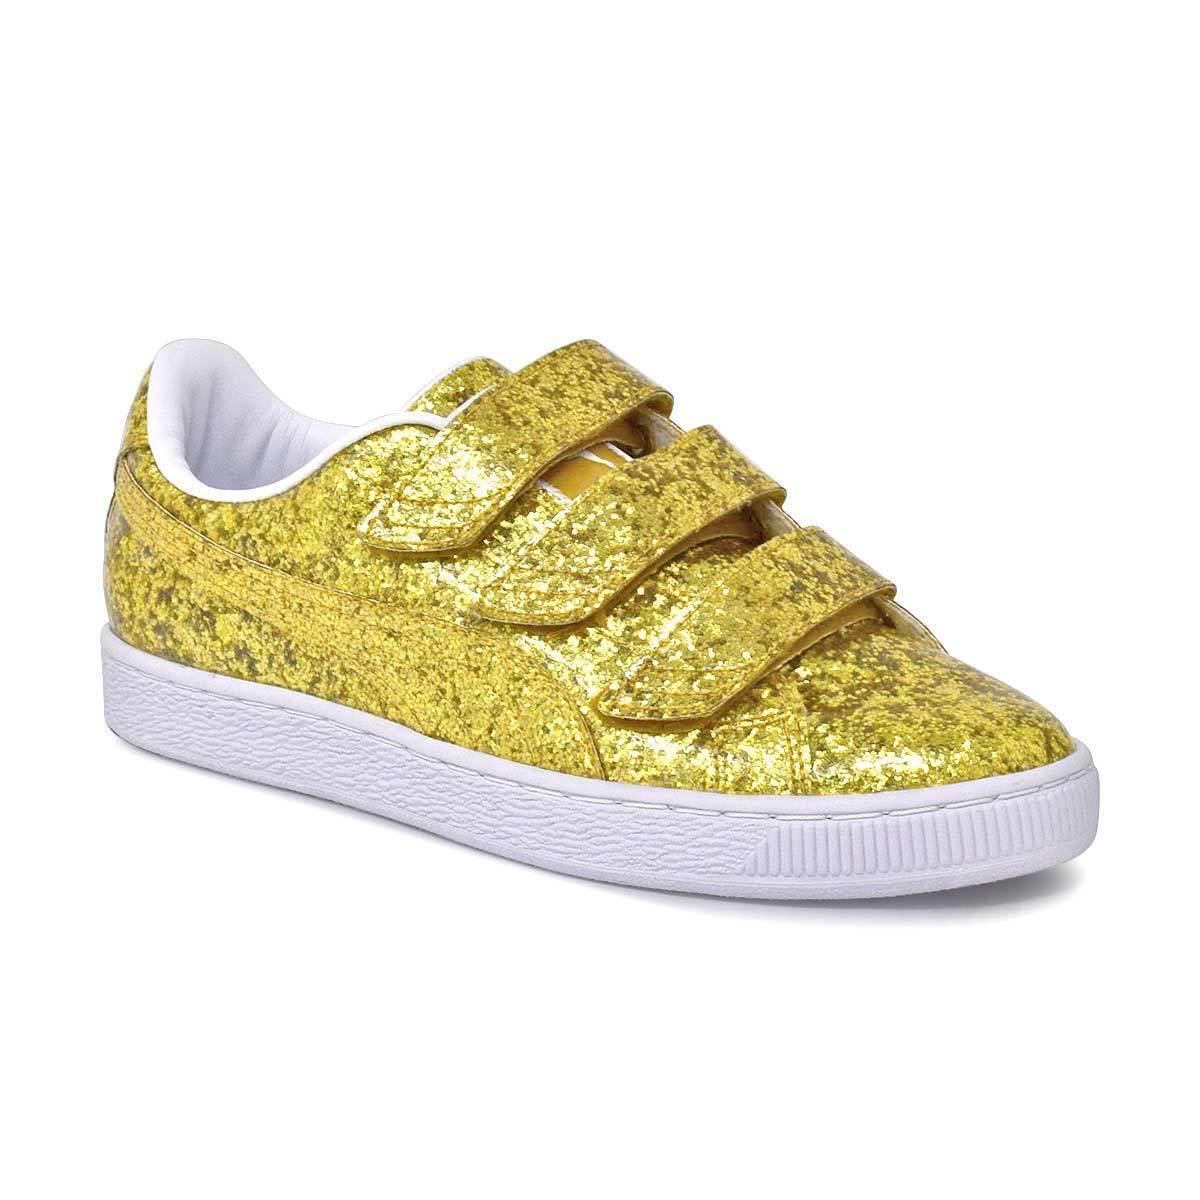 Puma Basket Strap Glitter 364070 02 Women`s Gold Low Top Sneakers Shoes C2065 - Gold